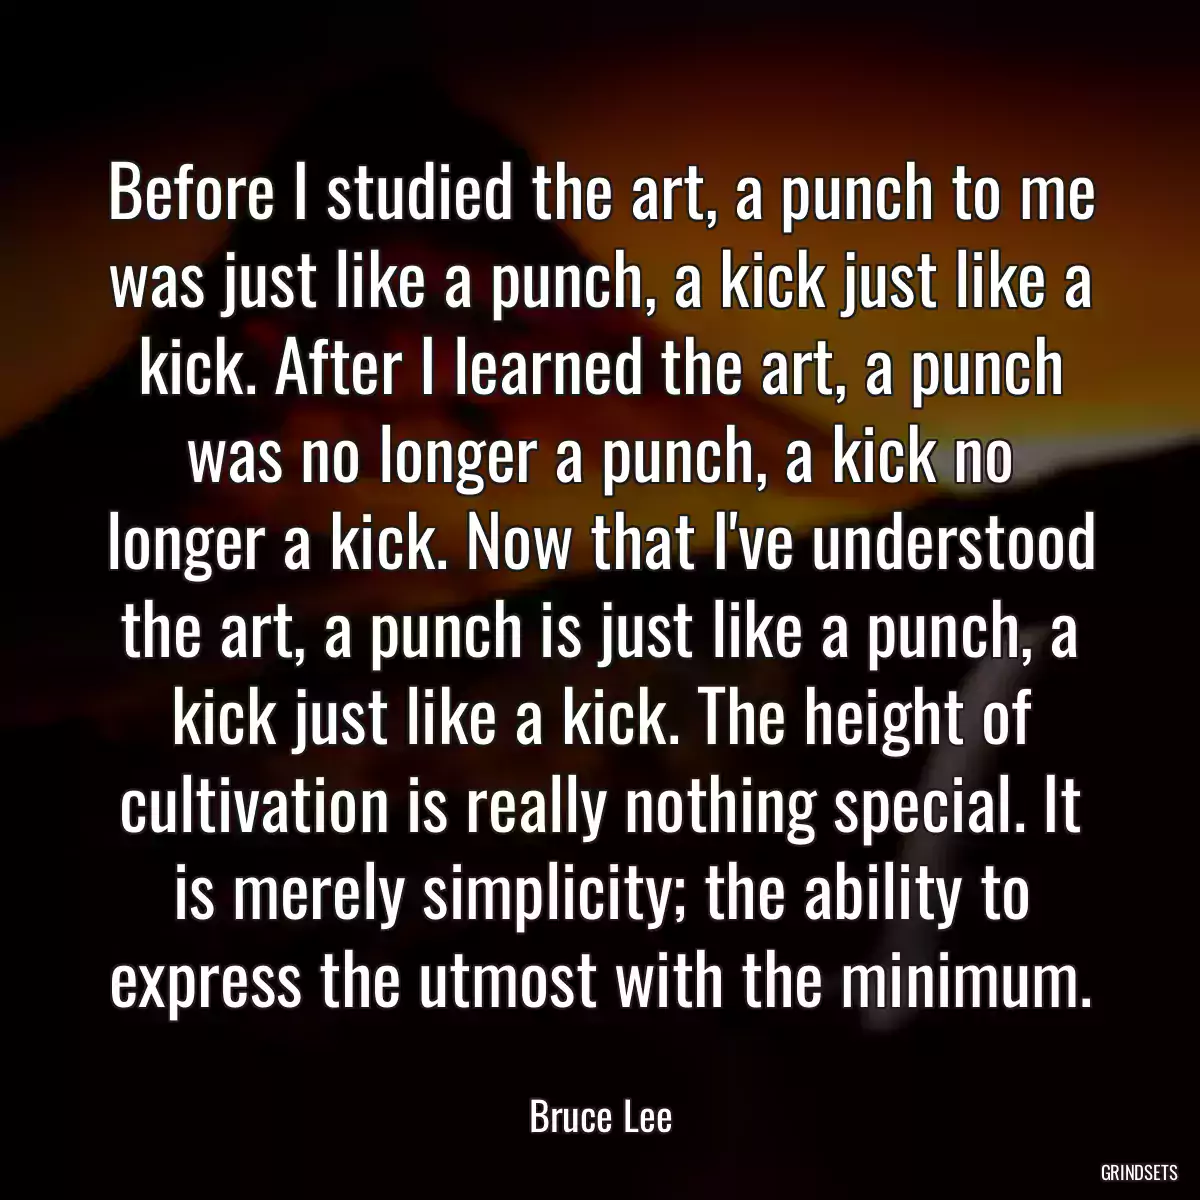 Before I studied the art, a punch to me was just like a punch, a kick just like a kick. After I learned the art, a punch was no longer a punch, a kick no longer a kick. Now that I\'ve understood the art, a punch is just like a punch, a kick just like a kick. The height of cultivation is really nothing special. It is merely simplicity; the ability to express the utmost with the minimum.